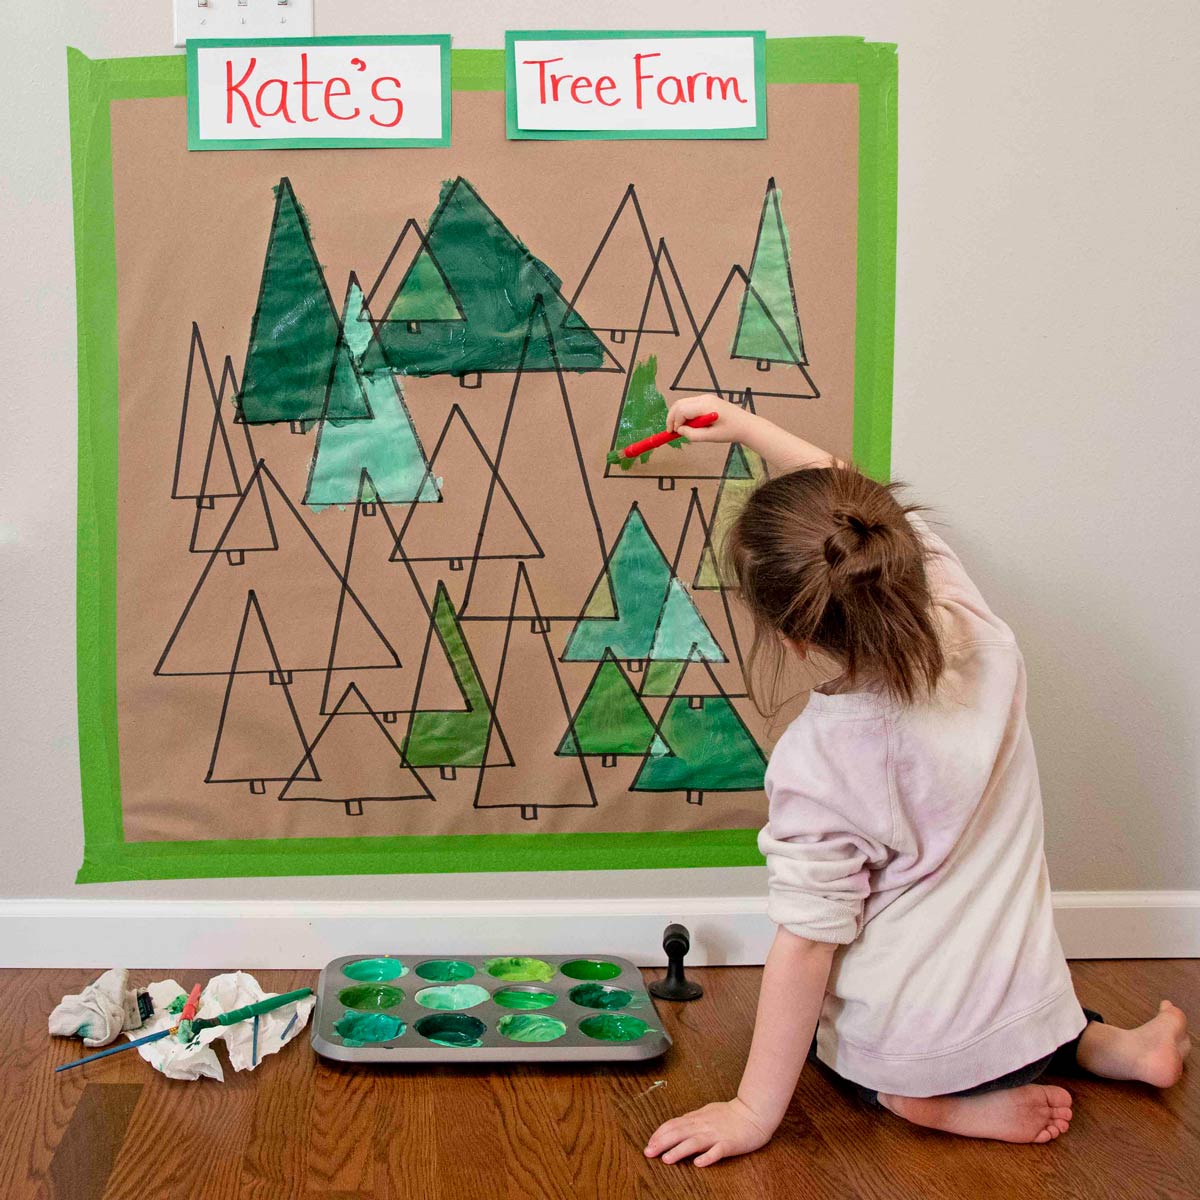 A child reaches up and paints one of several green triangles on a brown piece of paper.